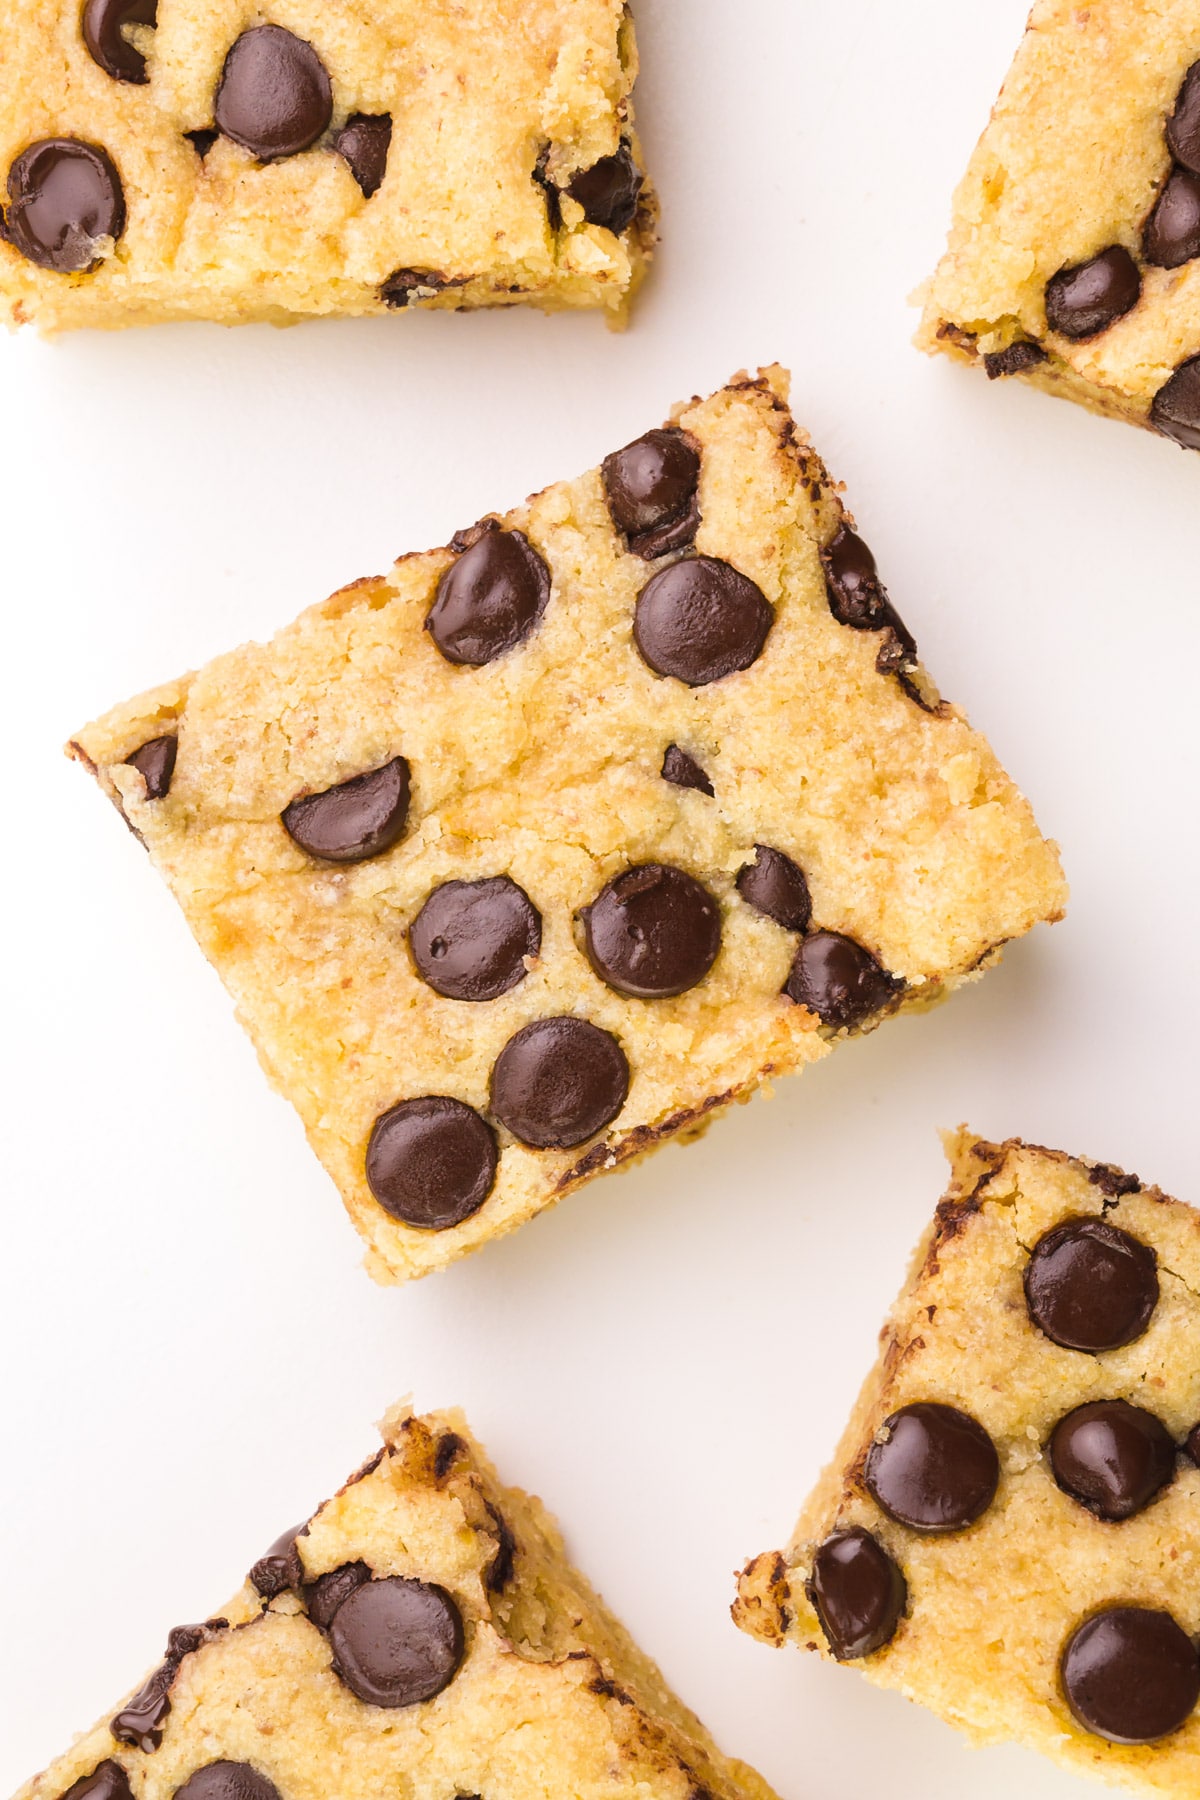 Looking down on a slice of vegan blondie with chocolate chips on top. There are more slices around it.